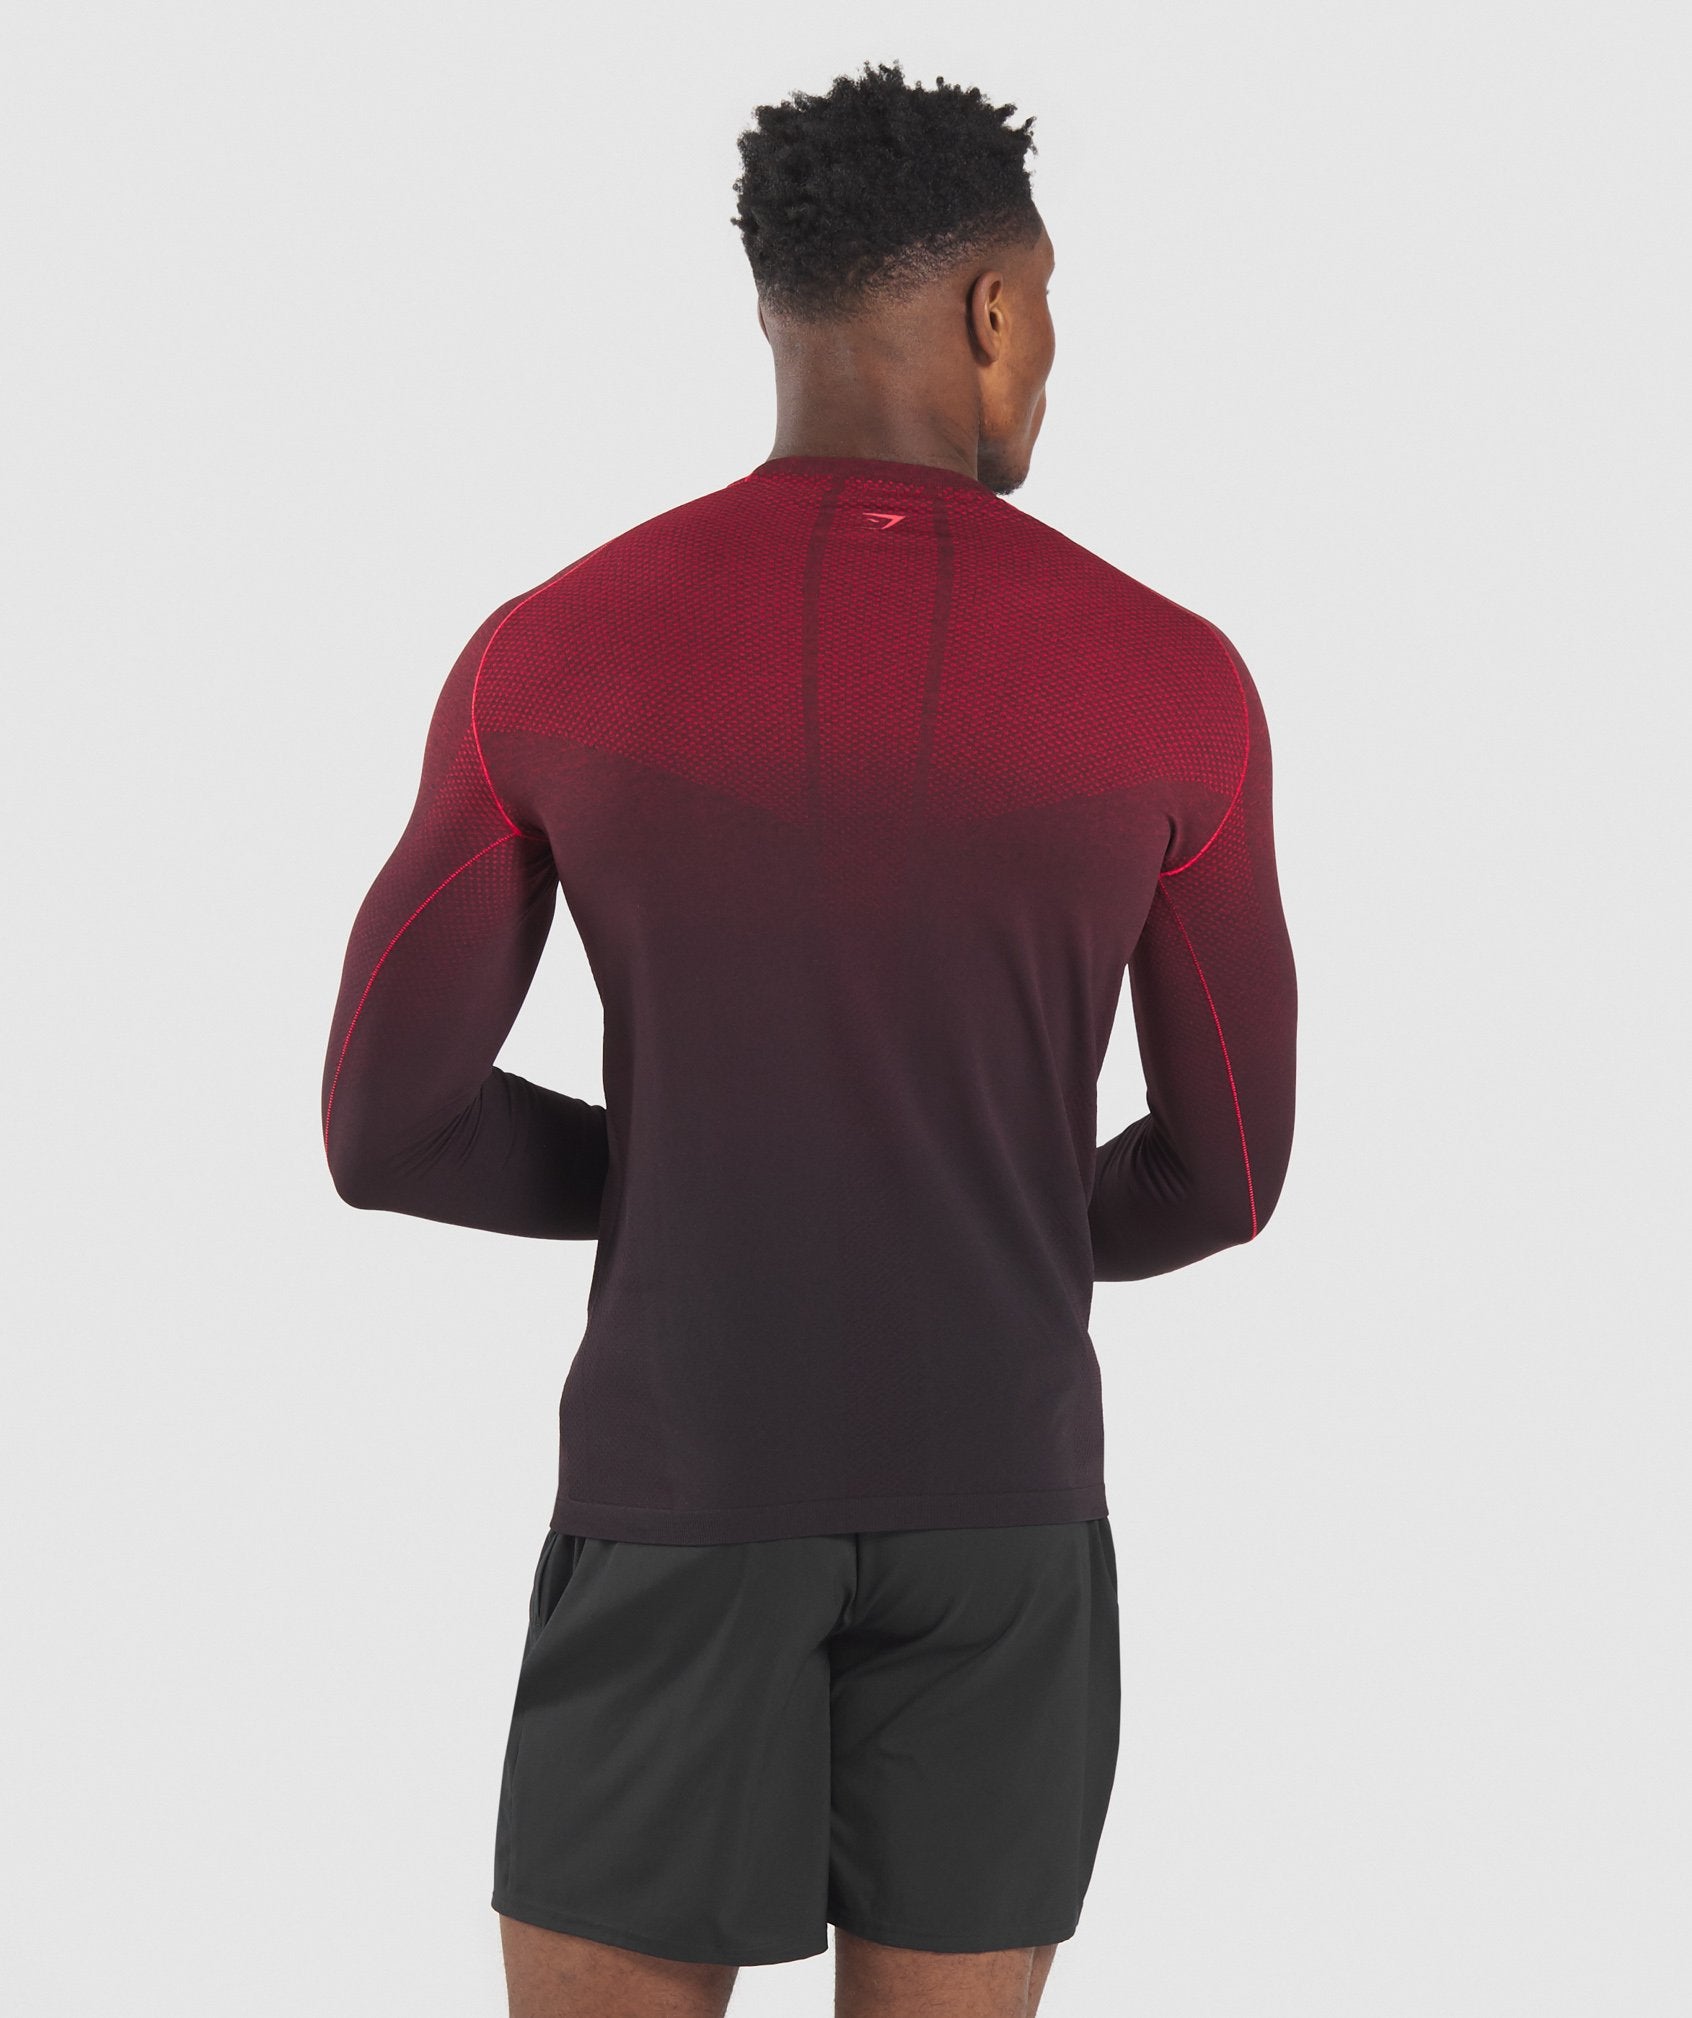 Vital Ombre Seamless Long Sleeve T-Shirt in Black/Red